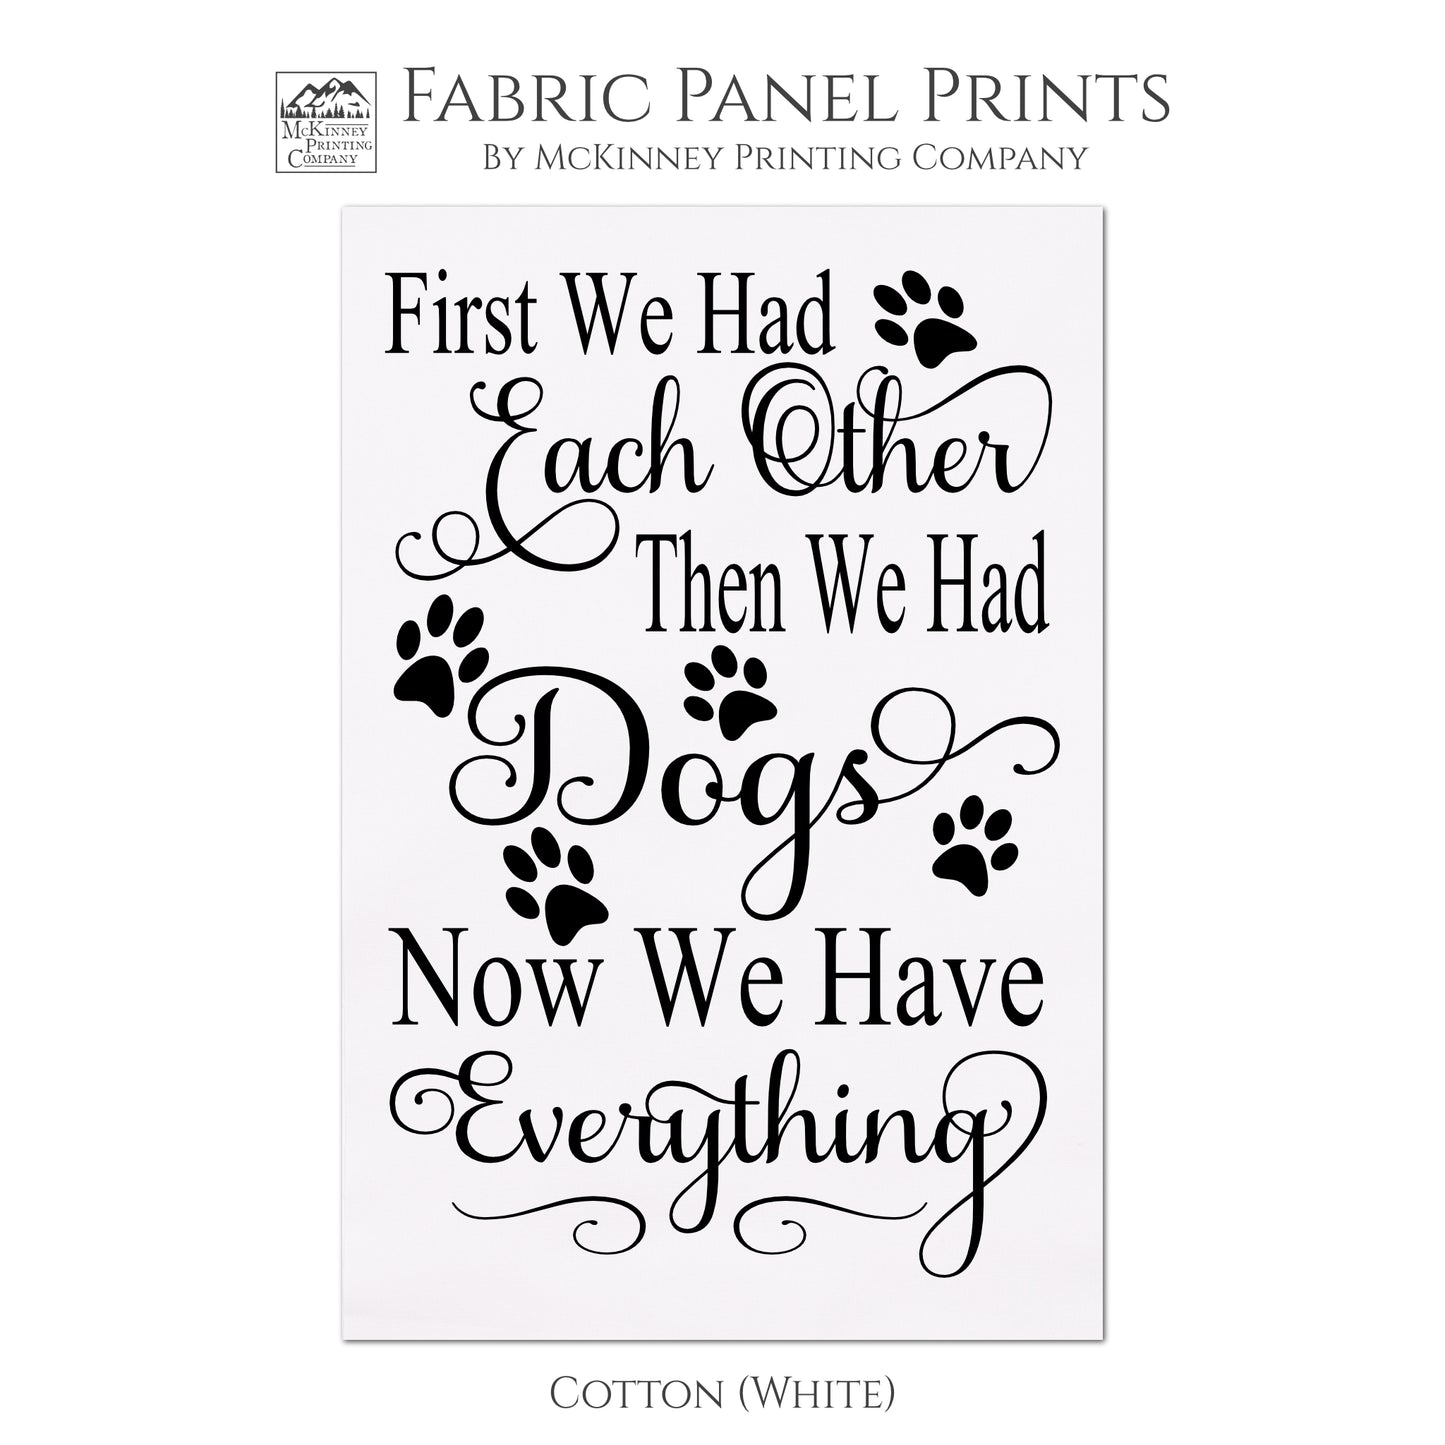 Dog Print Fabric - First we had each other, then we had Dogs. Now we have everything. Wall Art, Quilting, Quilt Block, Fabric Panels - Cotton, White